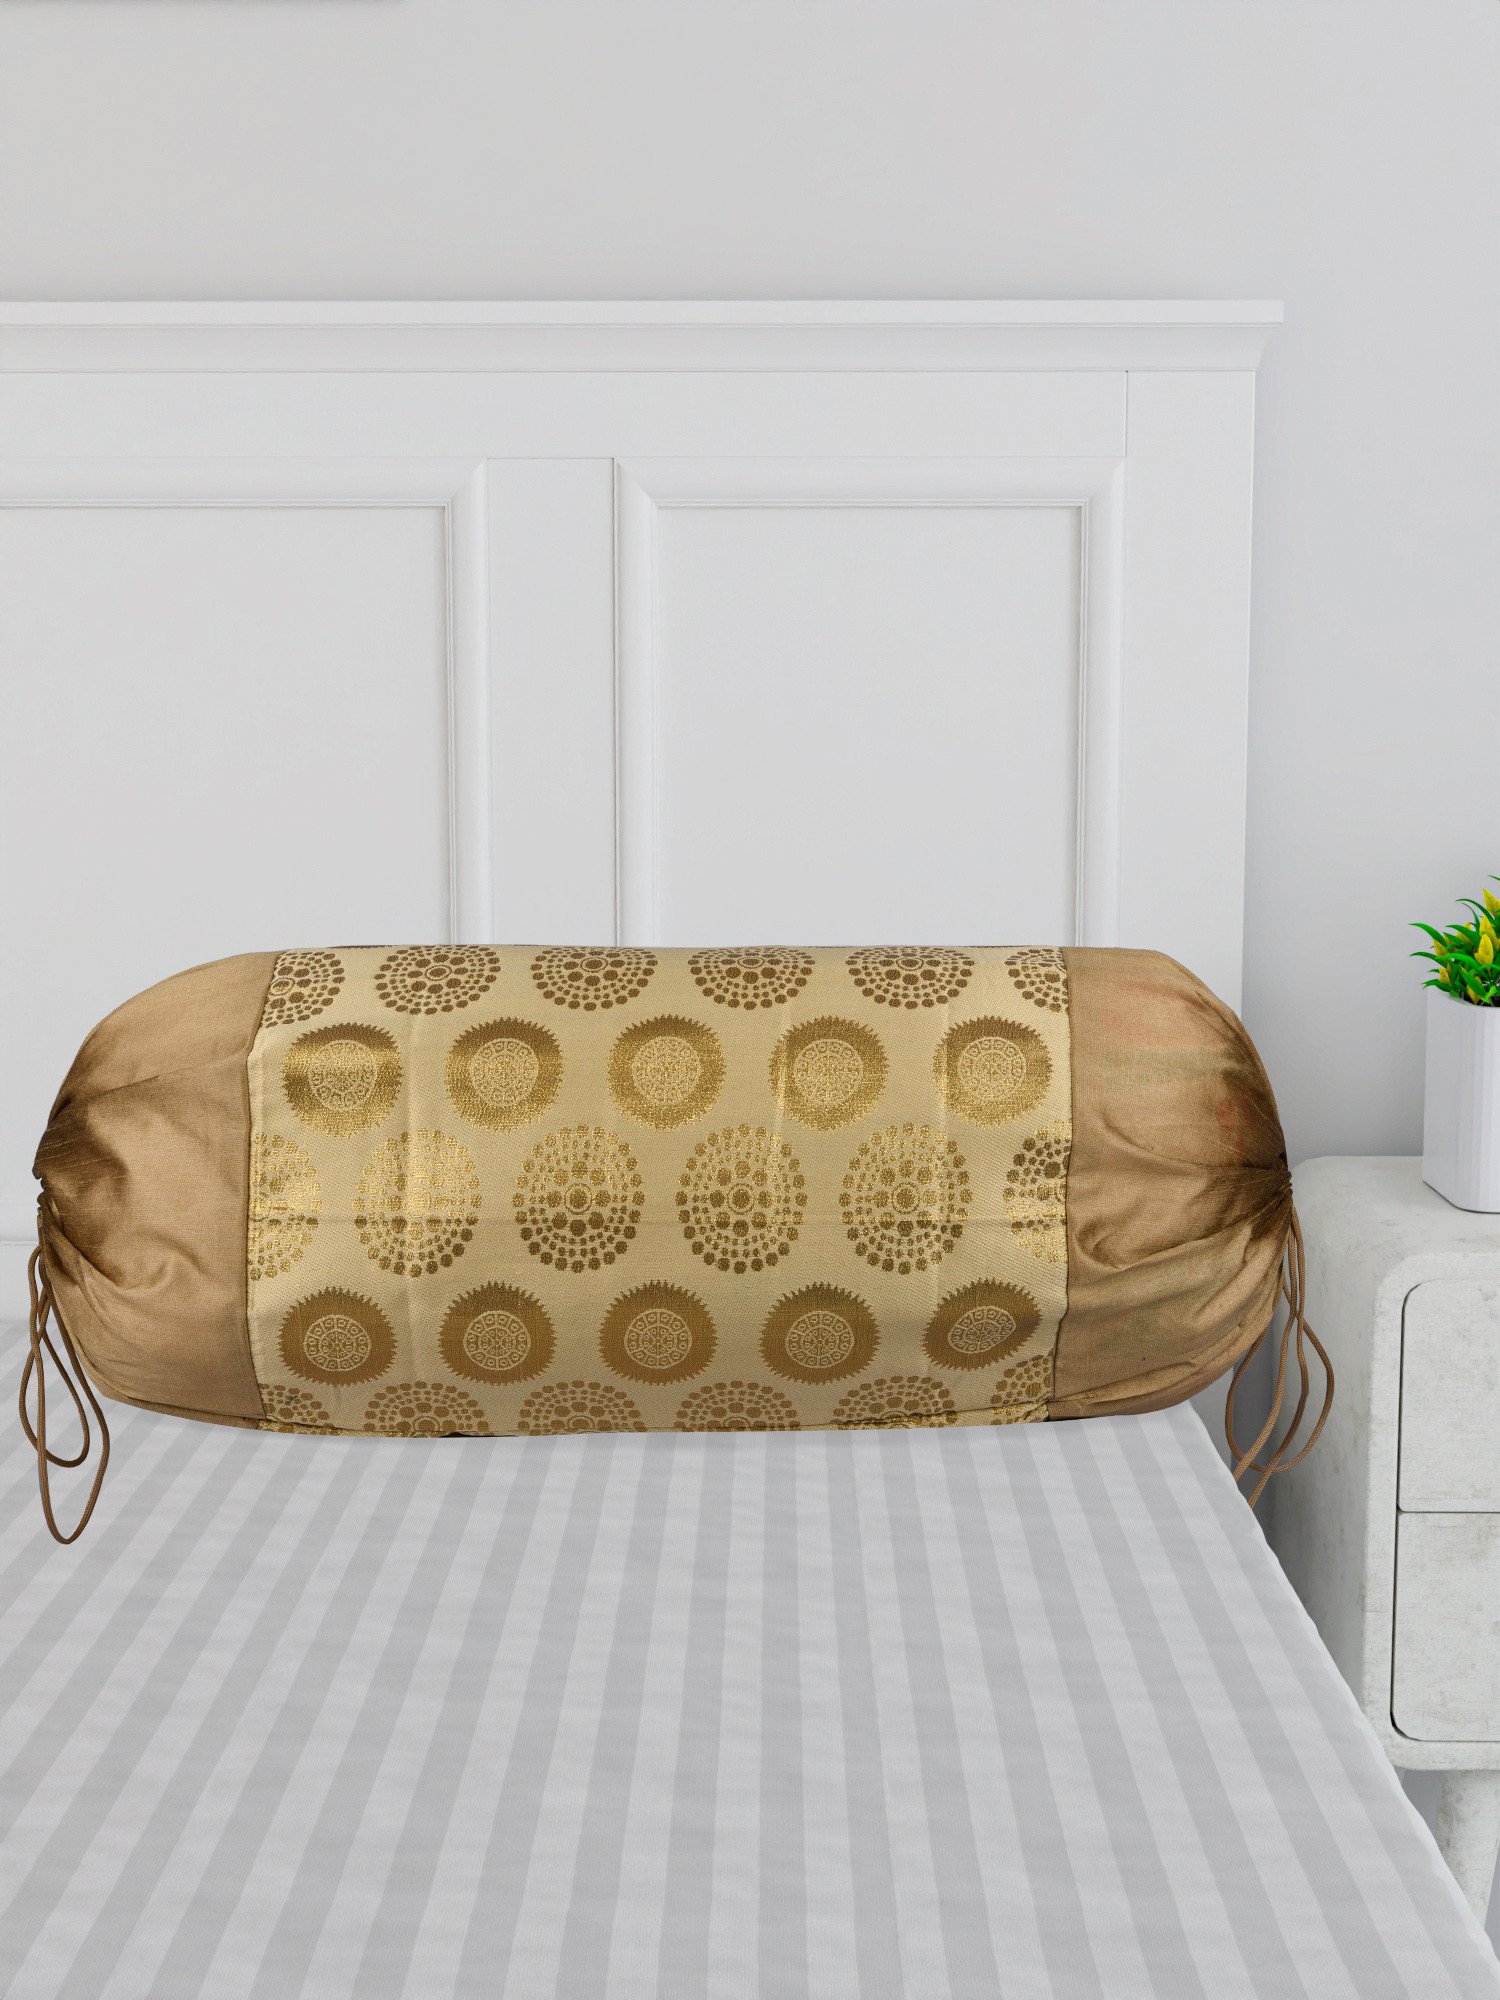 Kuber Industries Bolster Covers | Polyester Bolster Cover Set | Diwan Bolster Cover Set | Bolster Pillow Cover | Banarasi Gola Masand Cover | 16x32 Inch |Golden